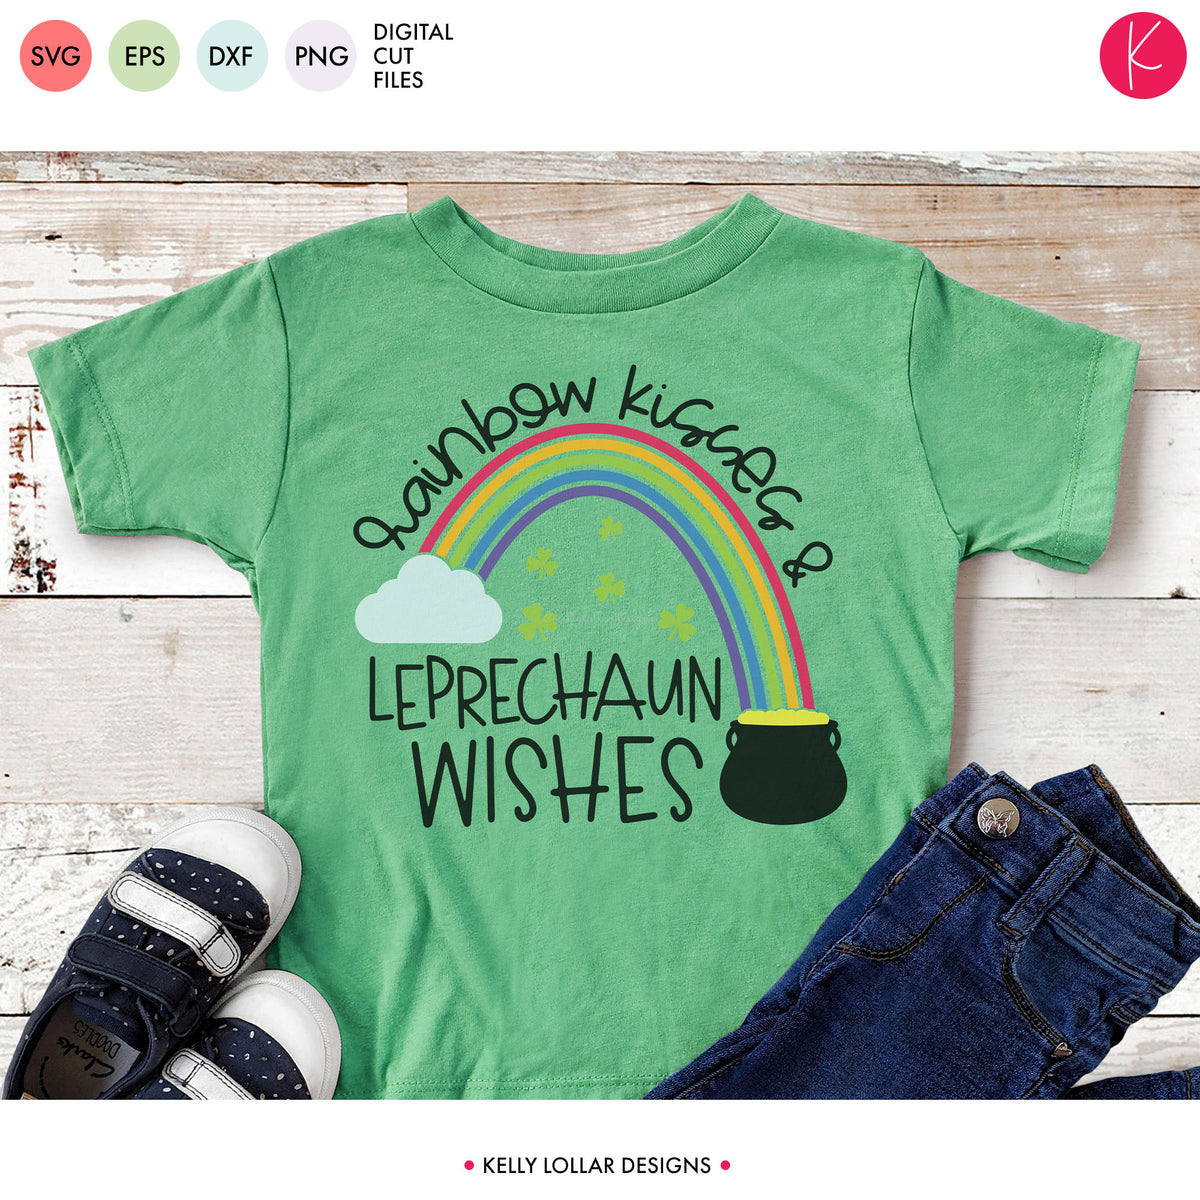 Rainbow Kisses and Leprechaun Wishes | SVG DXF EPS PNG Cut Files